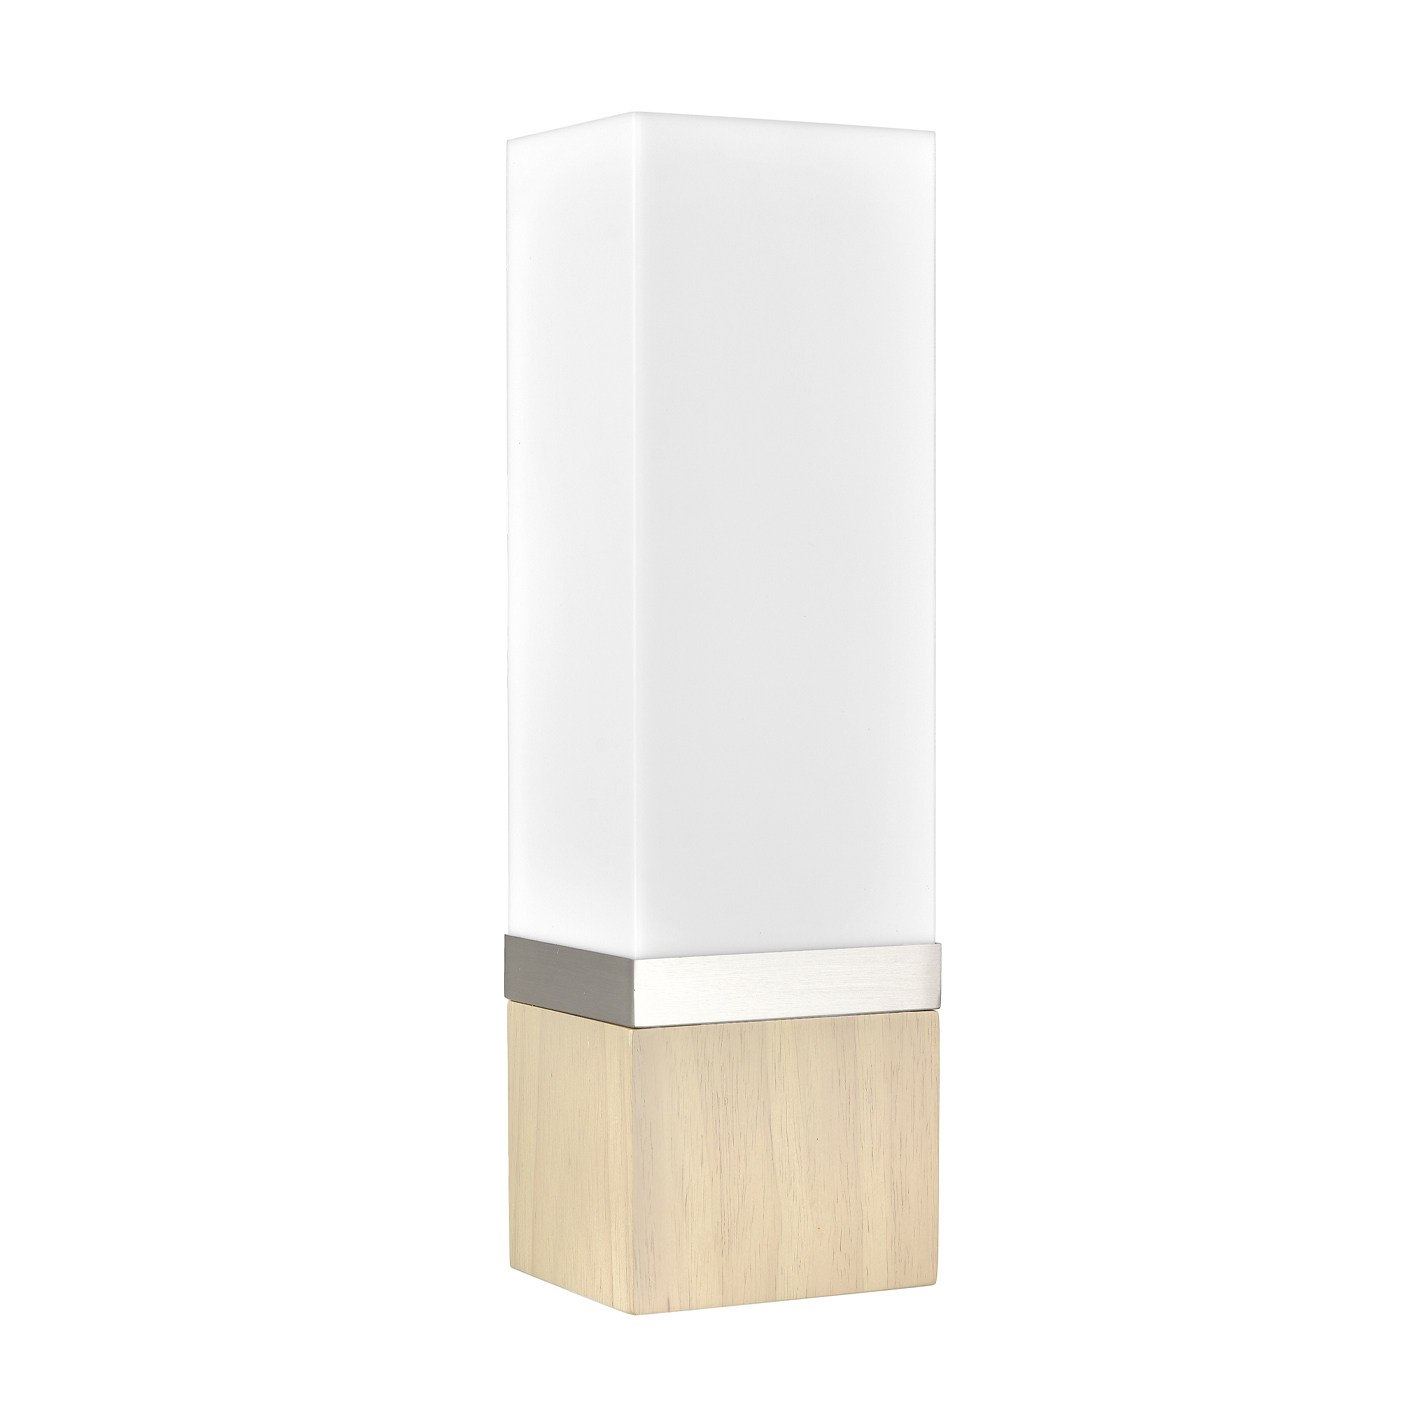 WALL SCONCE BRUSHED NICKEL PLUS WOOD HARDWIRED